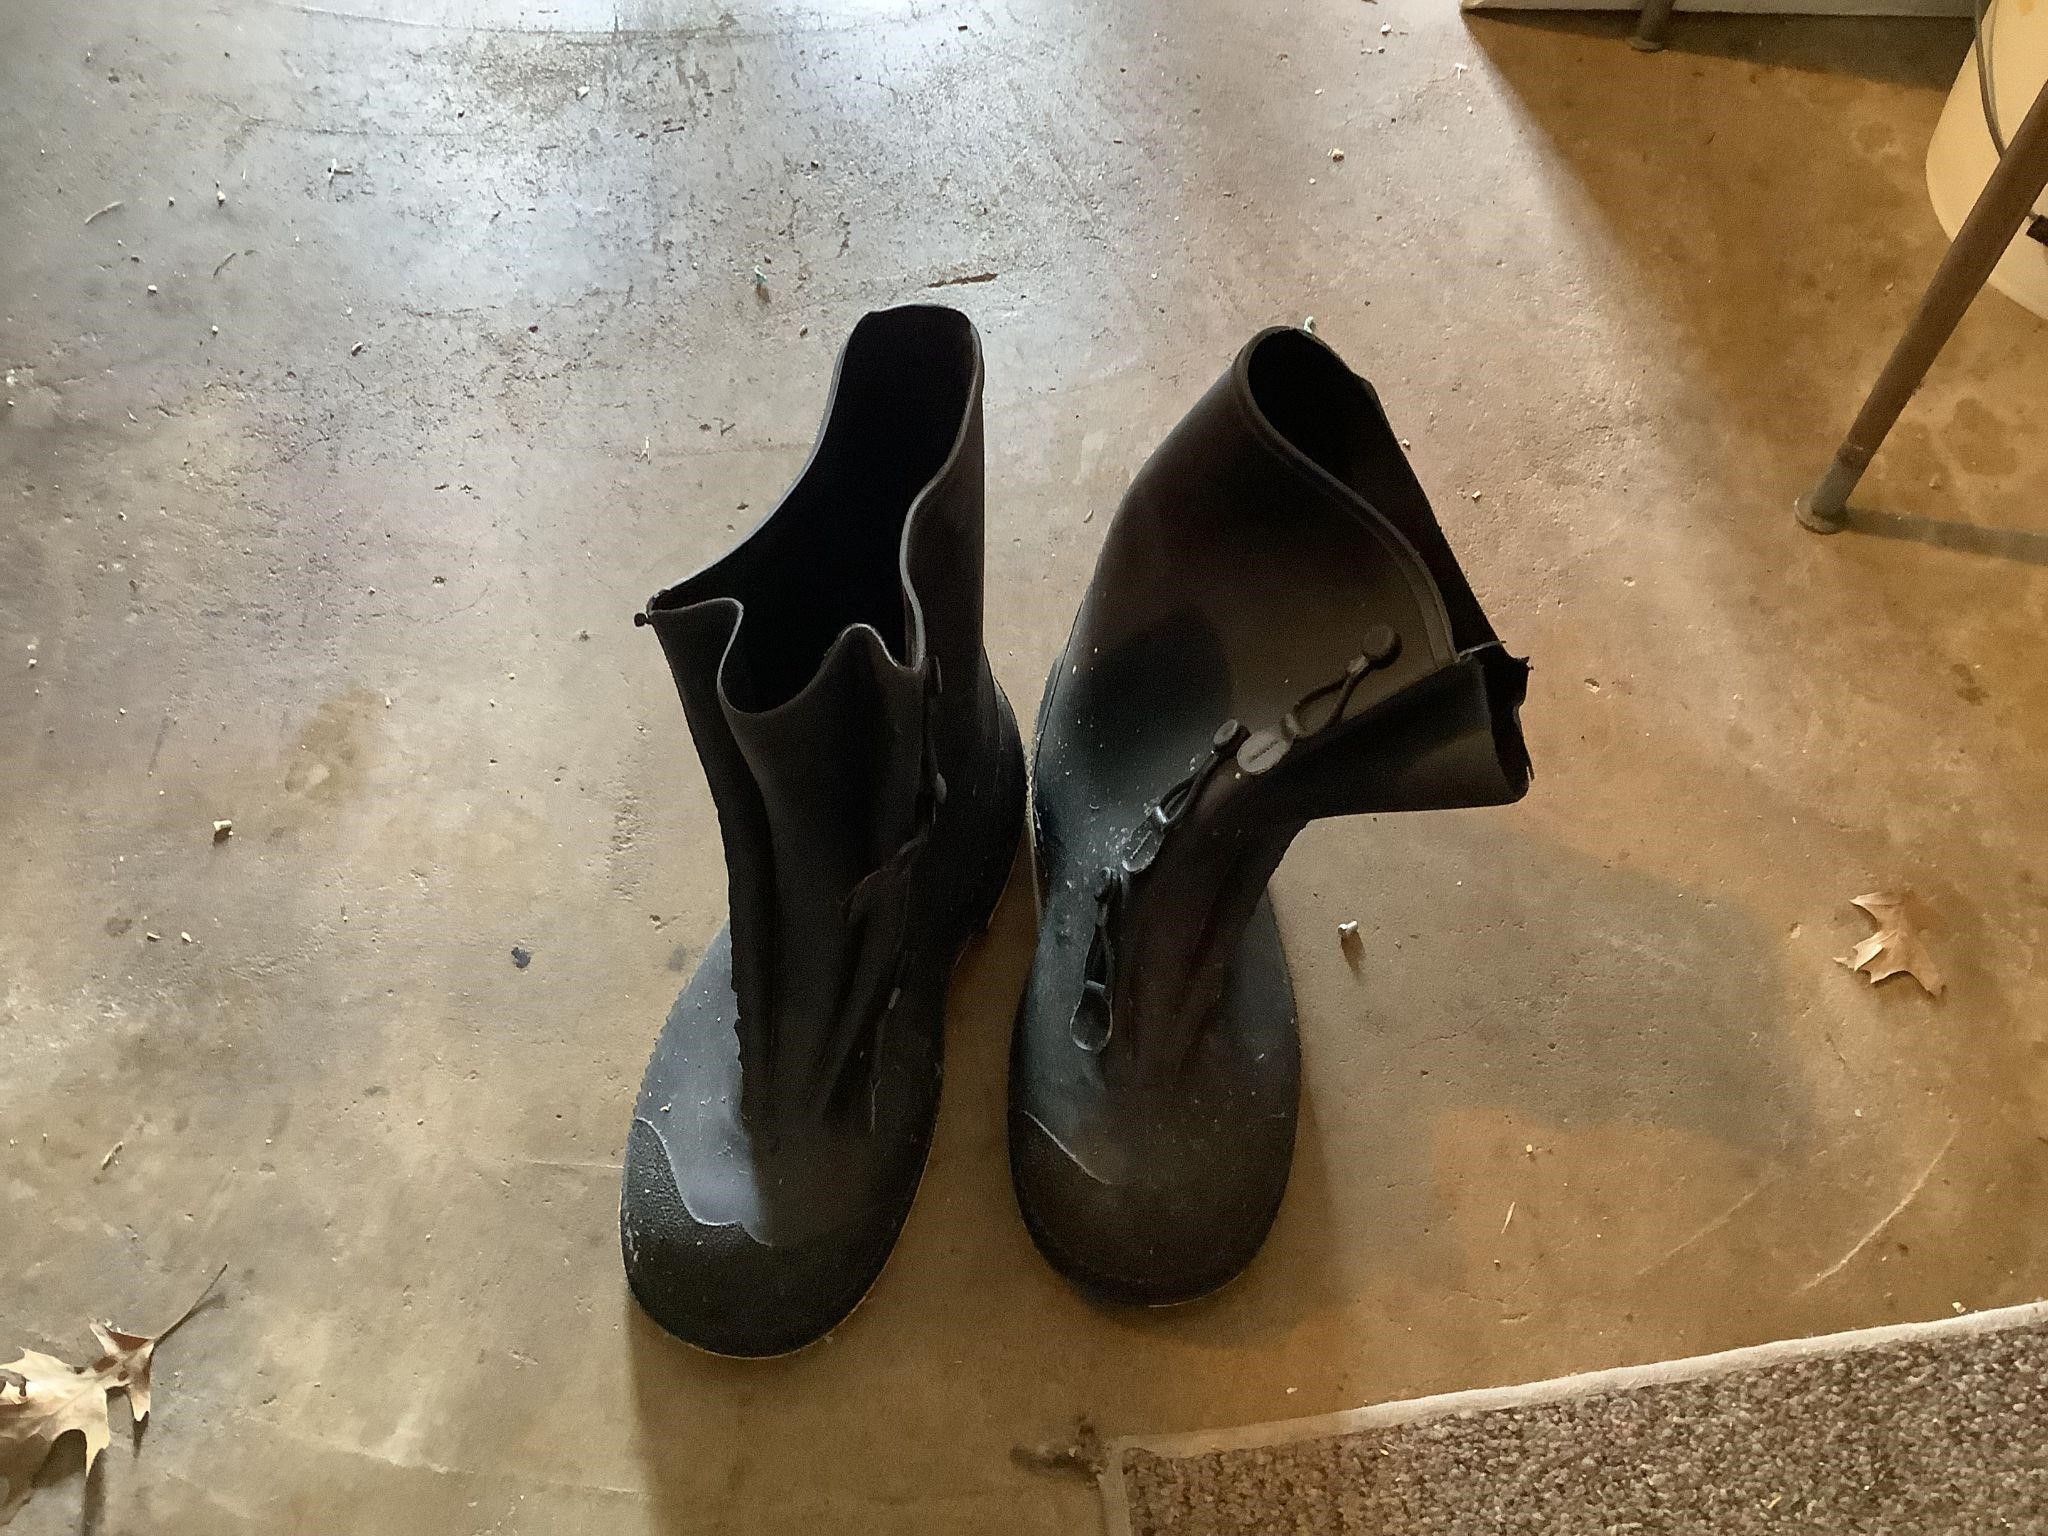 11-13 rubber boots